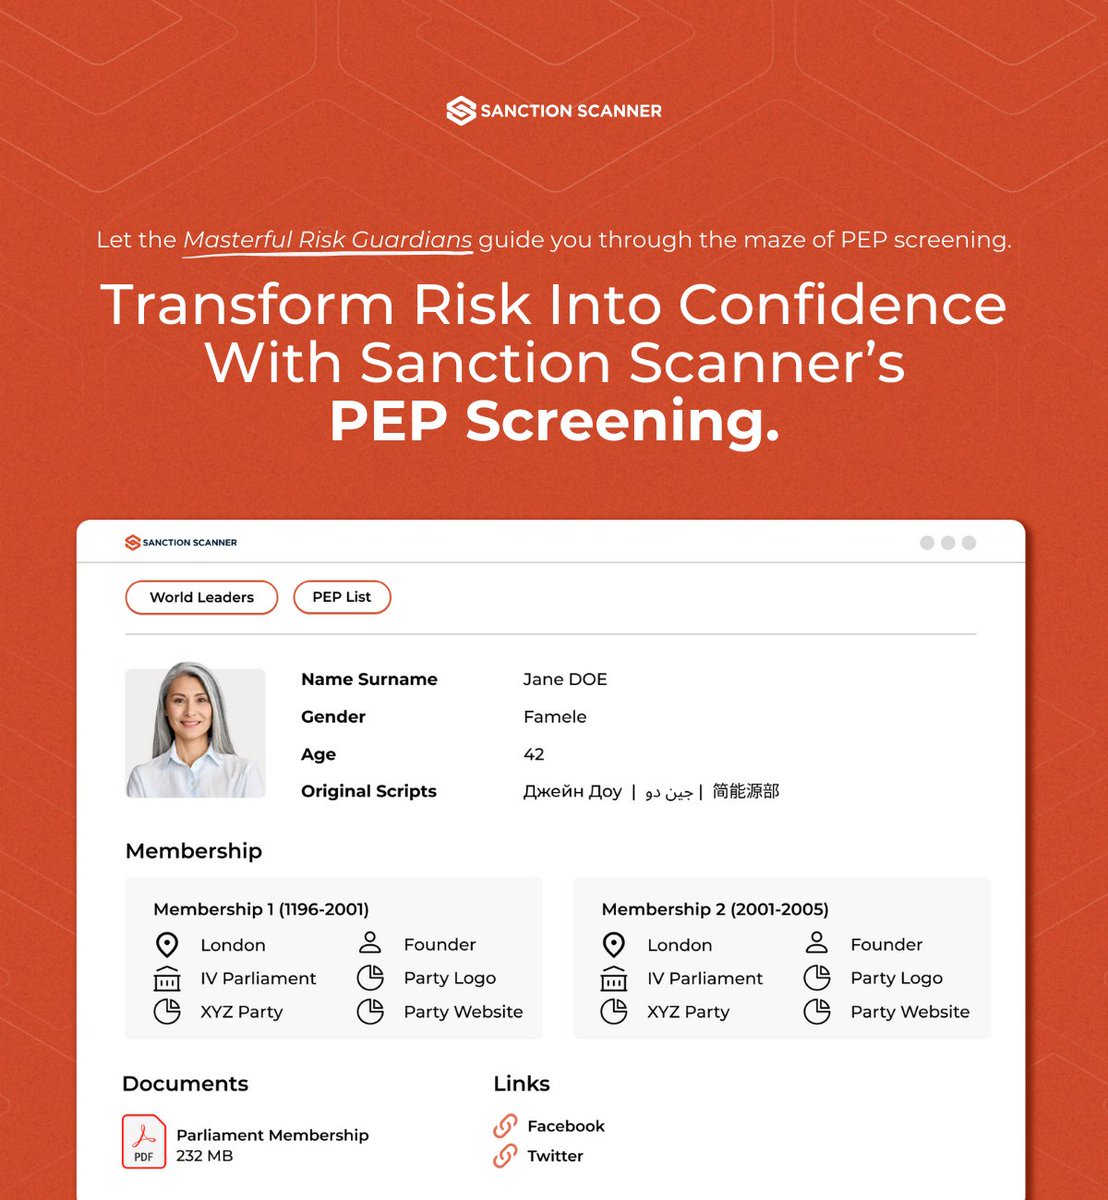 Navigate compliance confidently with Sanction Scanner's #PEP Screening! 🌐 As your #MasterfulRiskGuardians, we make compliance seamless, turning challenges into opportunities. 🛡️ Ready for a hassle-free #compliance journey? Schedule a demo today! sanctionscanner.com/contact